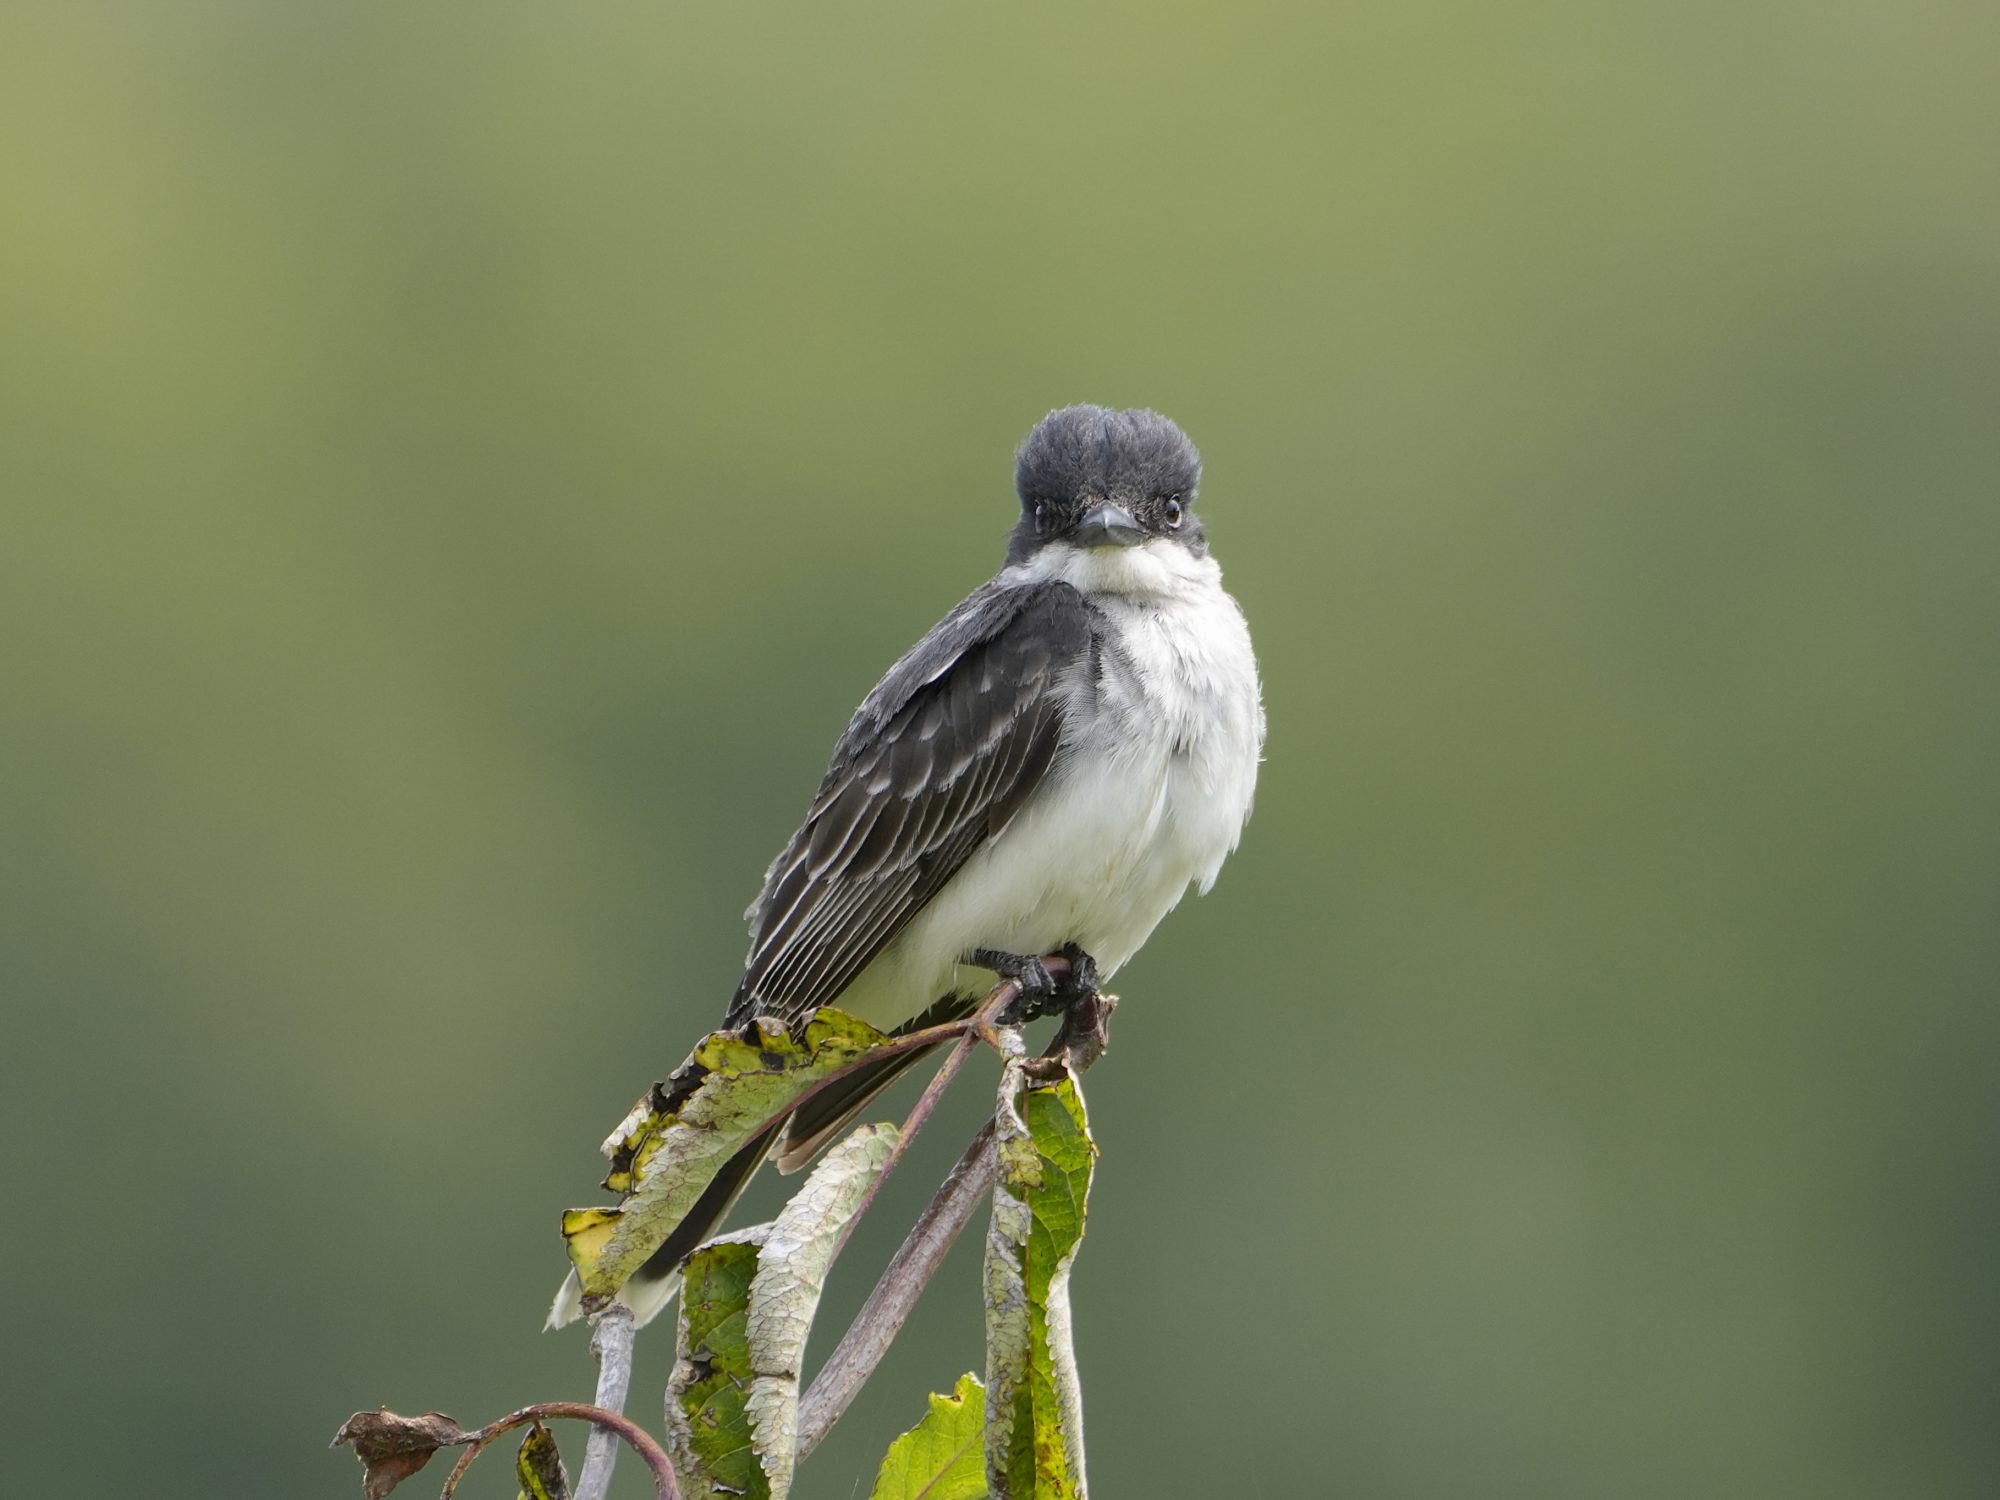 An Eastern Kingbird on a little branch, looking right at me